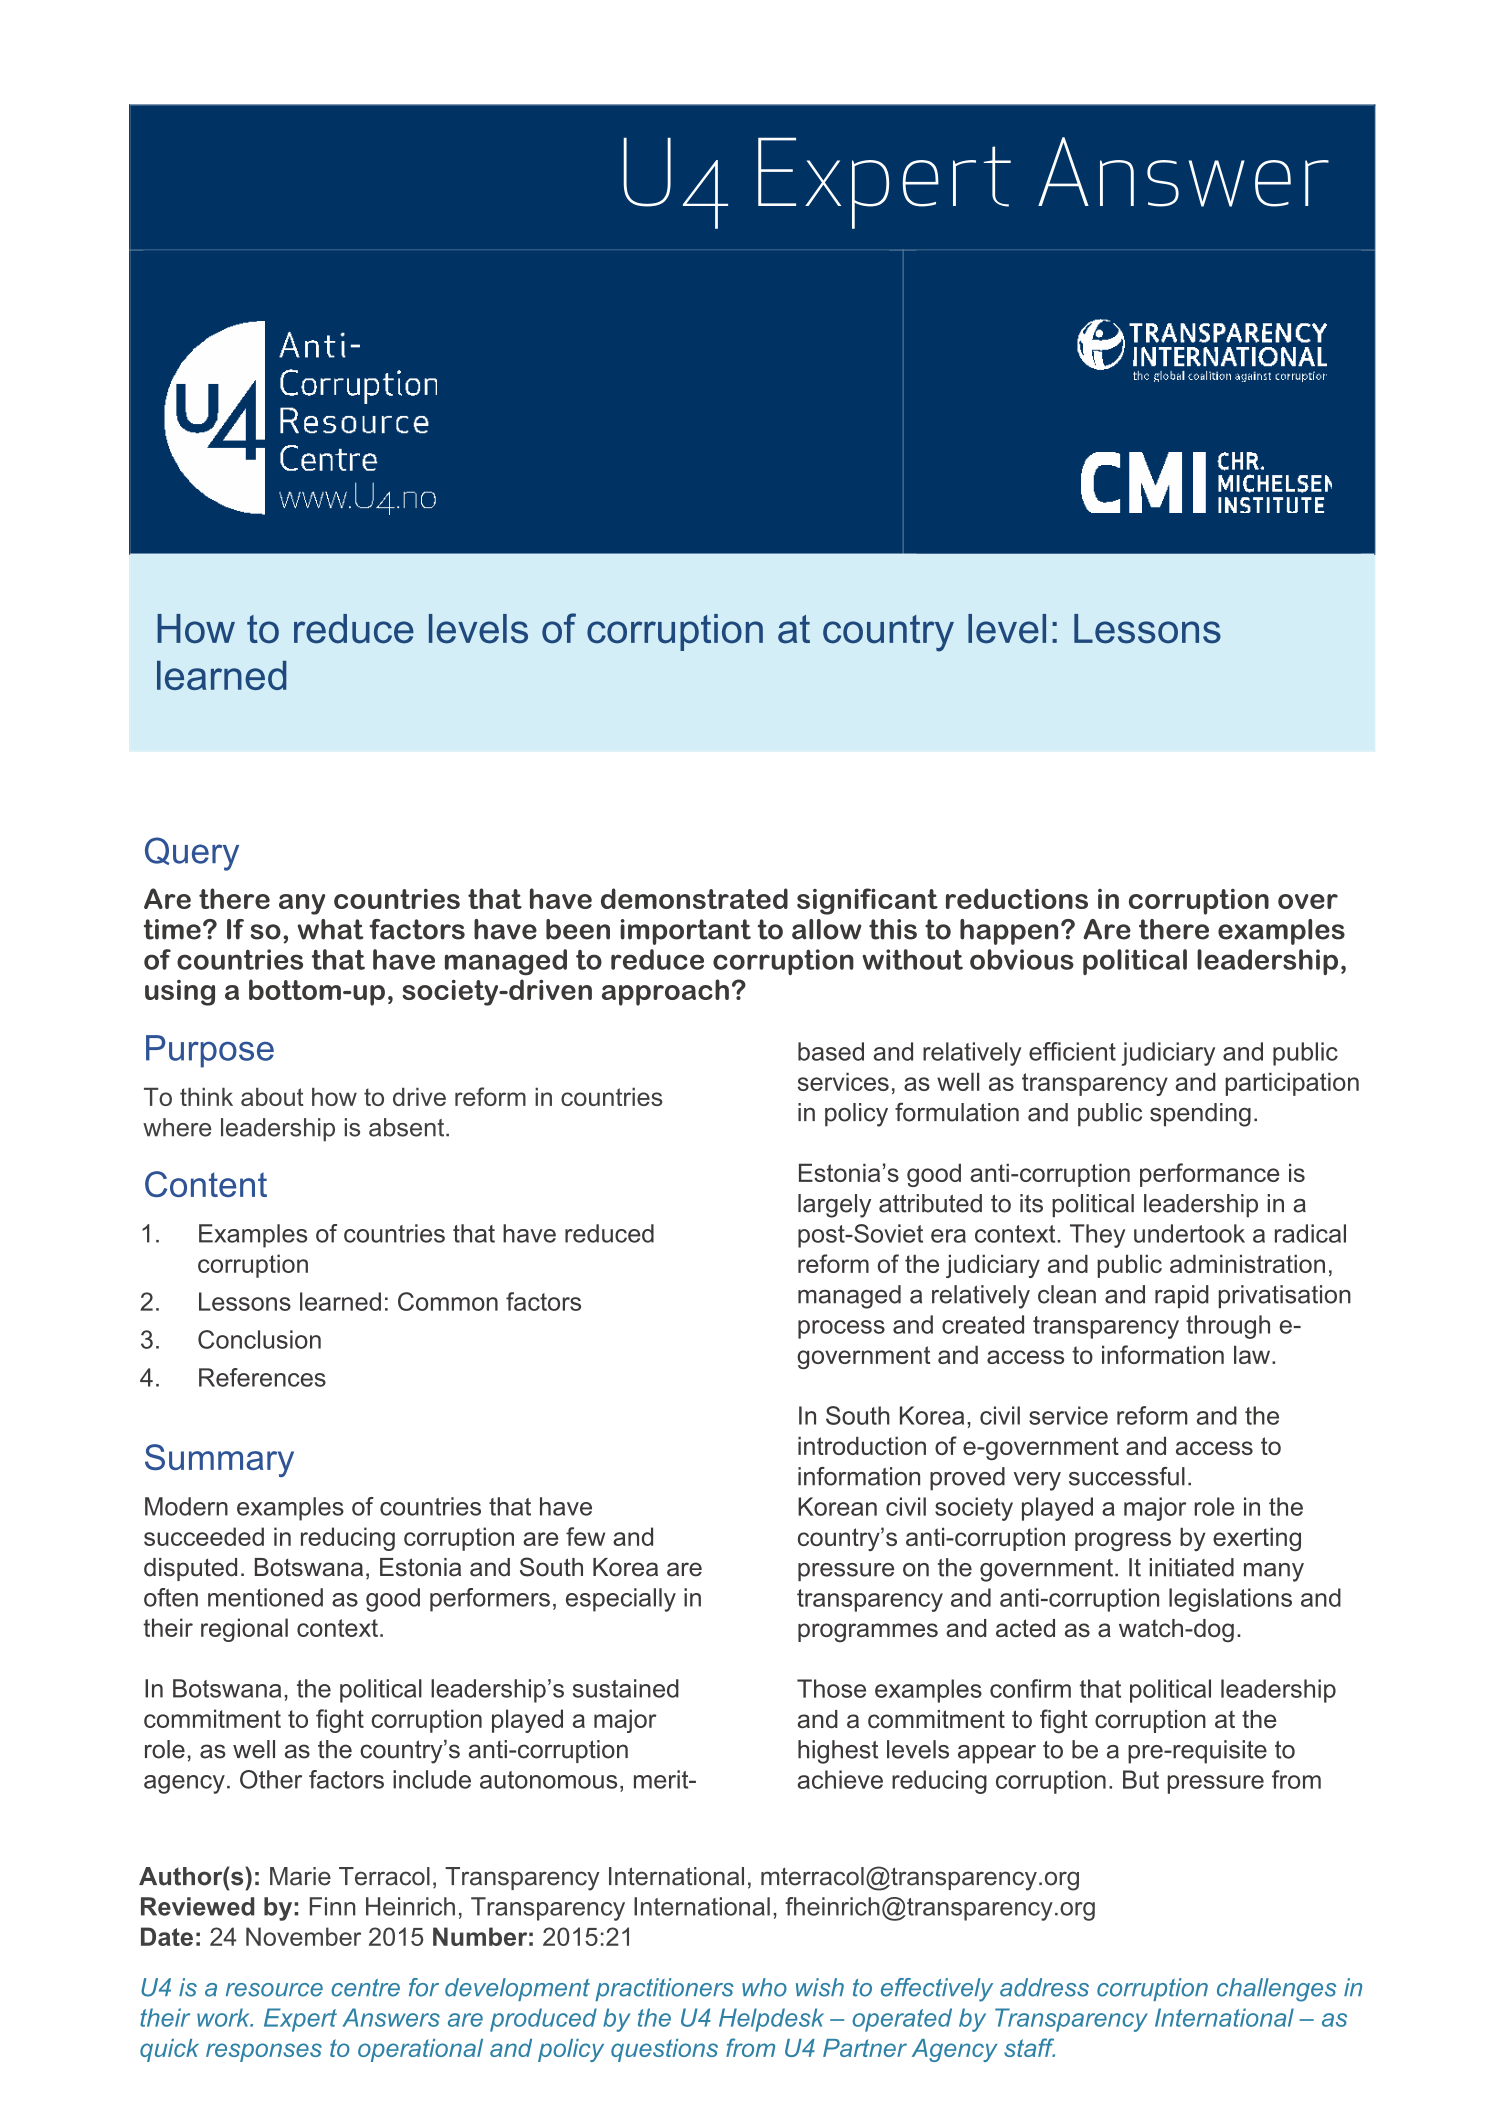 How to reduce levels of corruption at country level: Lessons learned